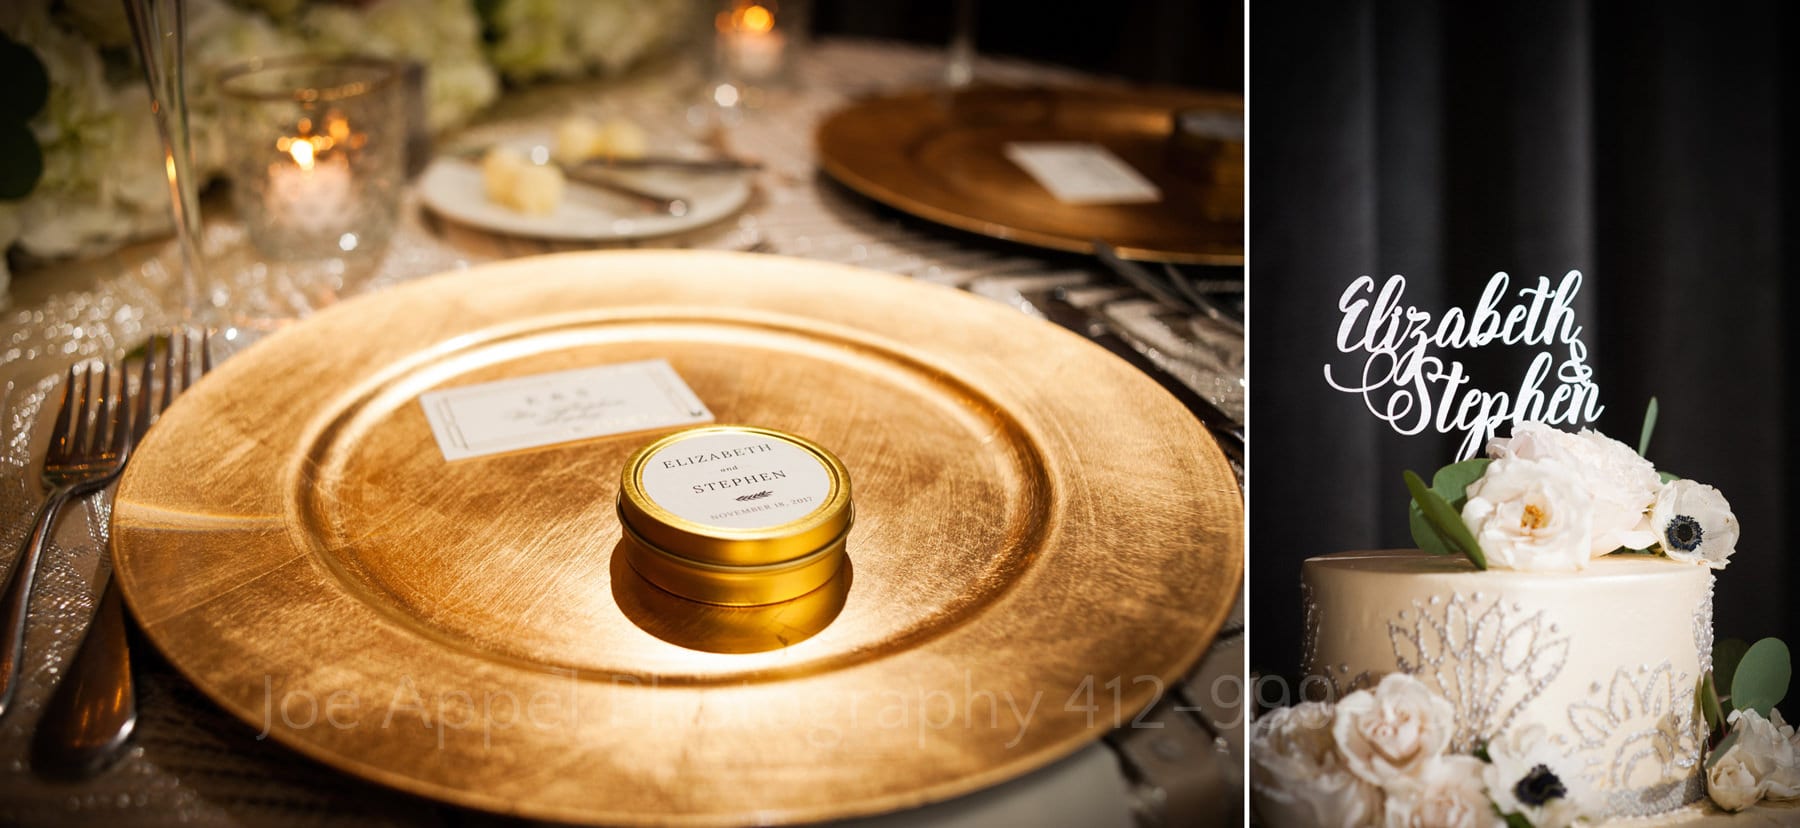 personalized wedding favors on a gold charger and a cake topper on a white wedding cake with the names elizabeth & stephen in script above flowers at a hotel monaco pittsburgh wedding.